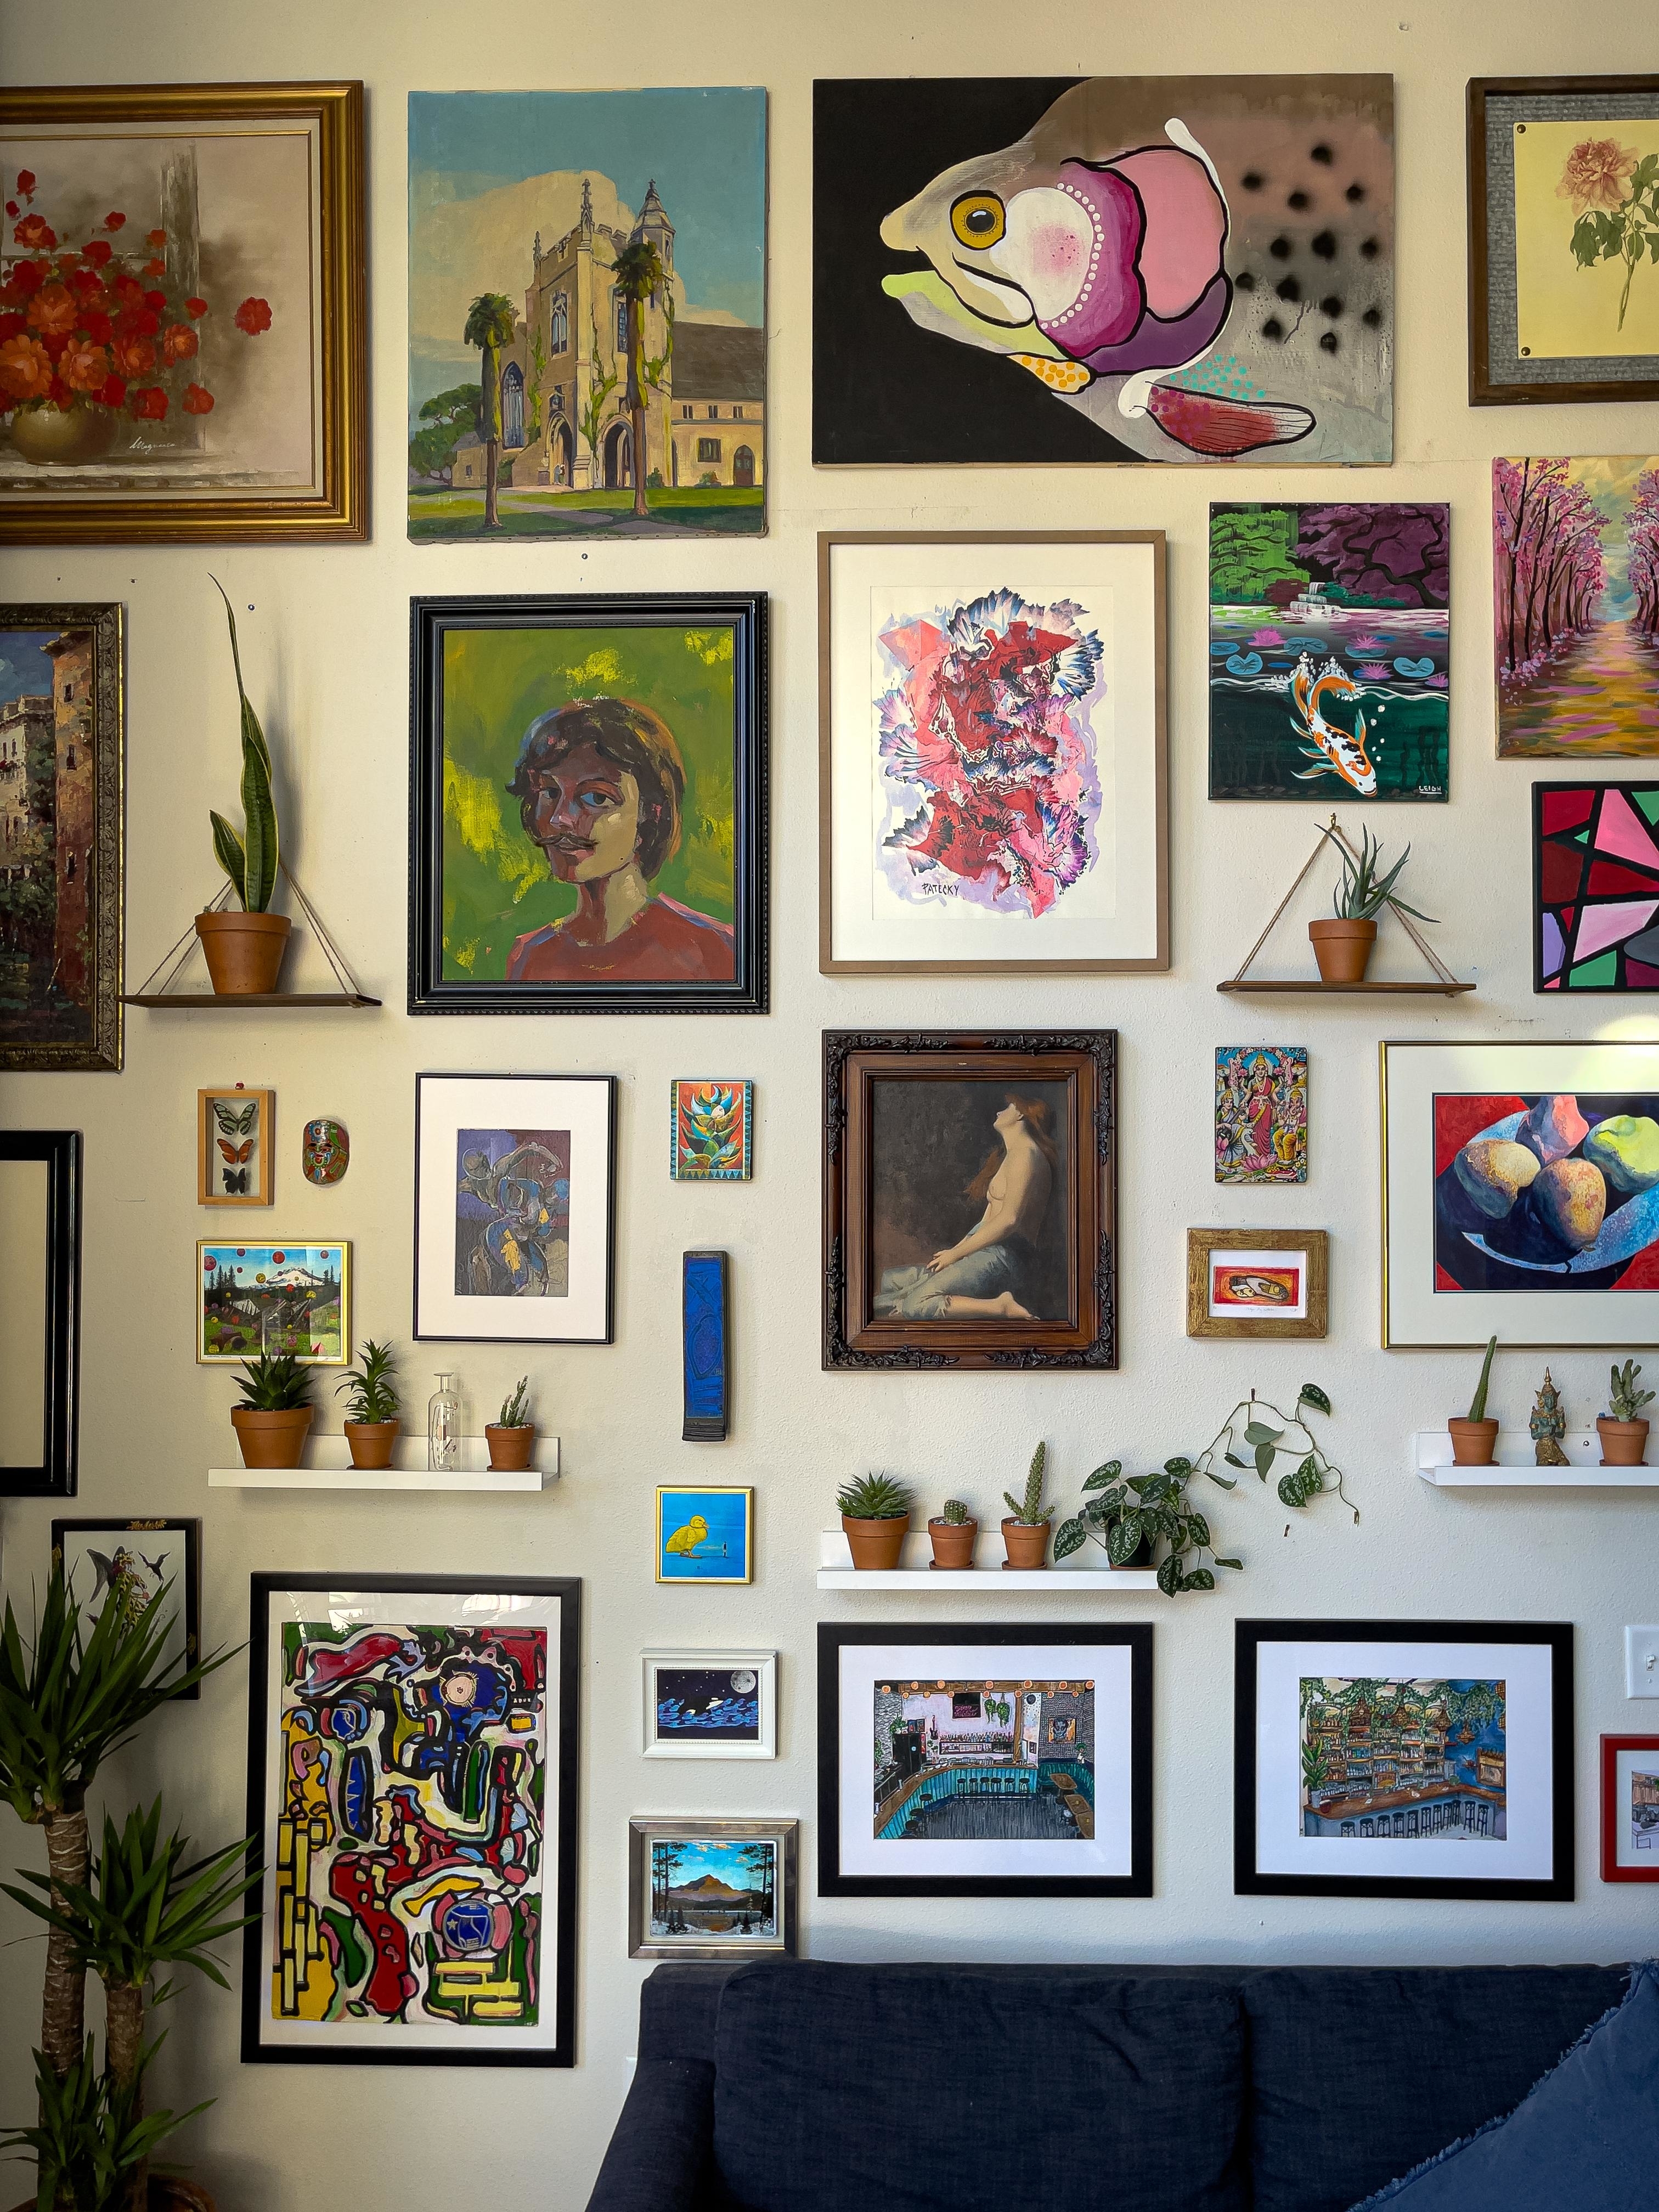 Wall art gallery with many framed prints